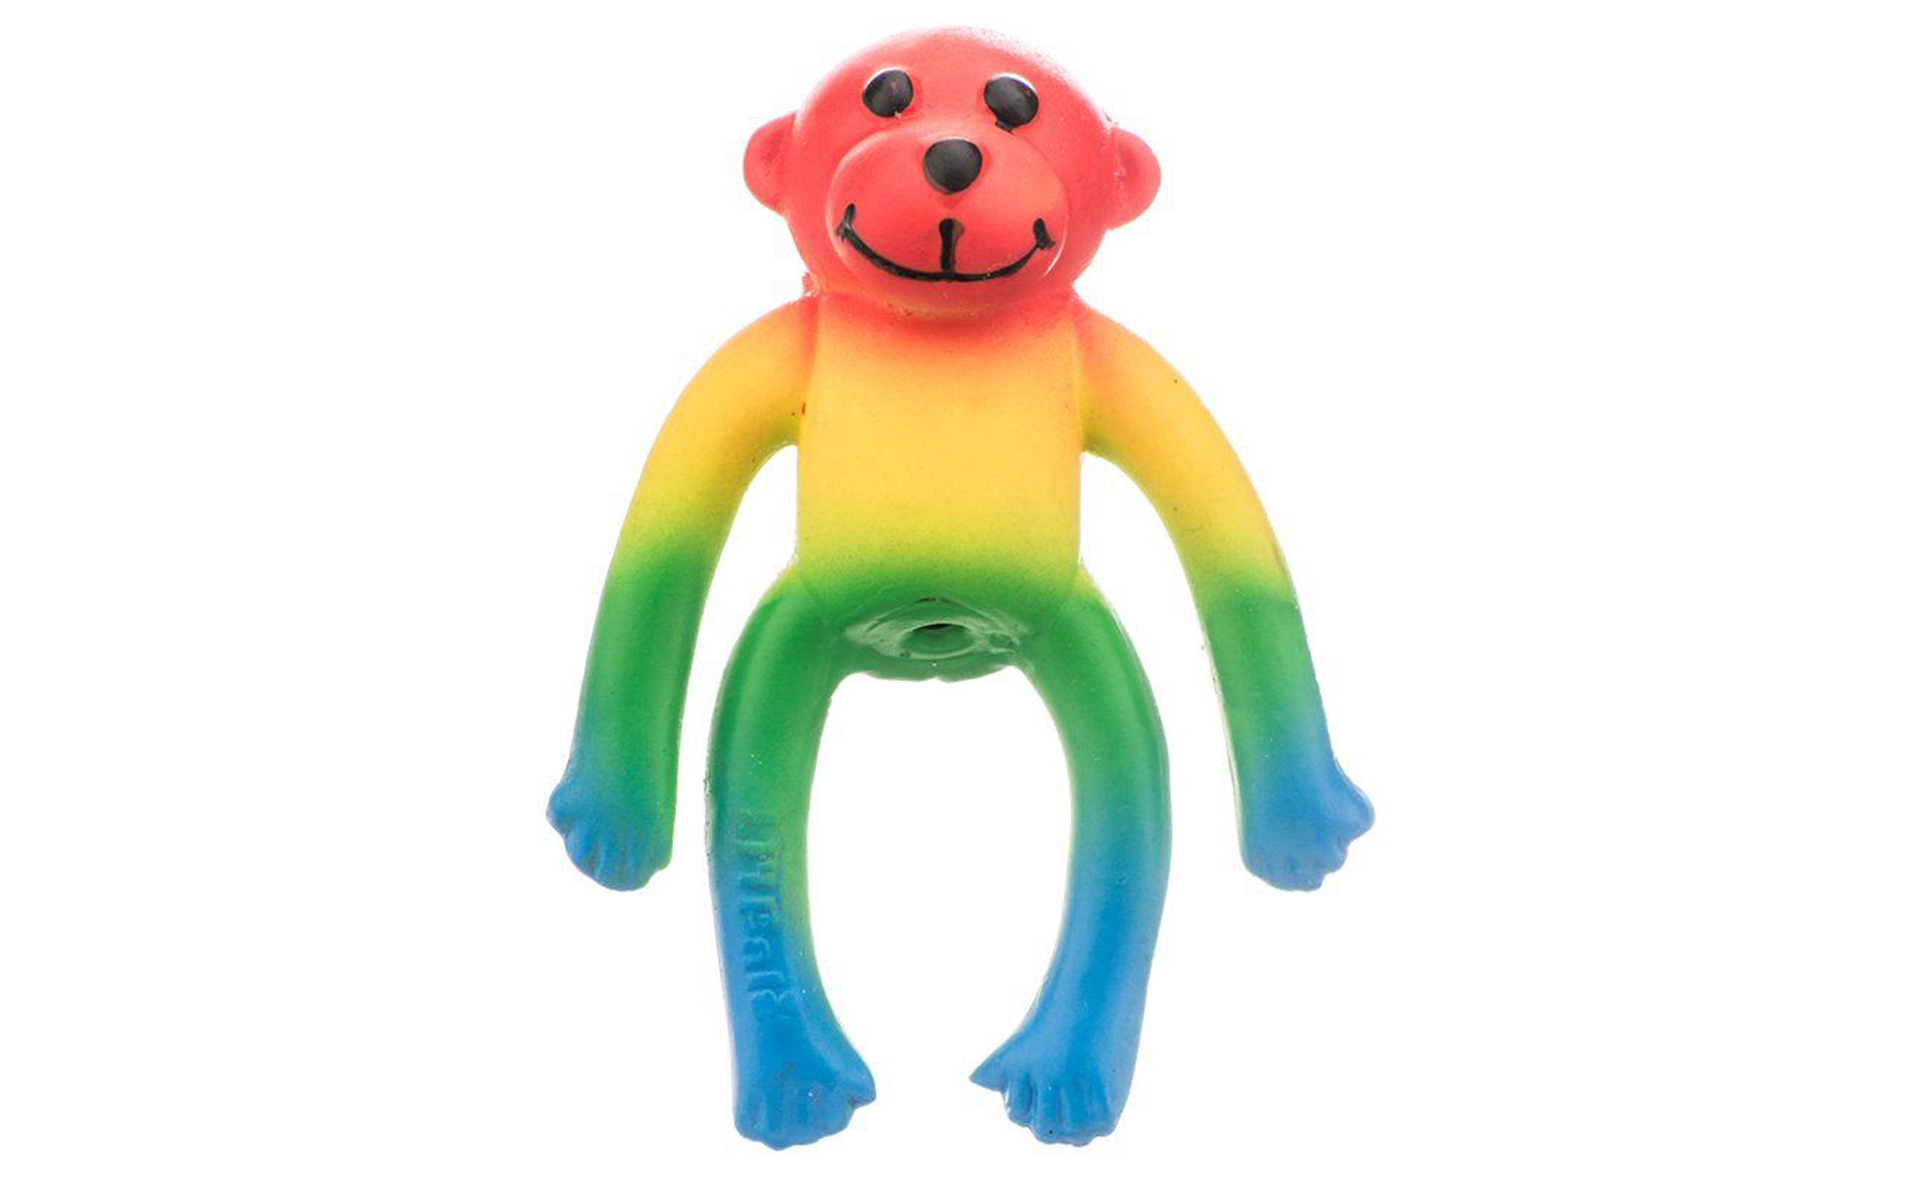 Latex Monkey Dog Toy - Assorted Colors, 4" Long